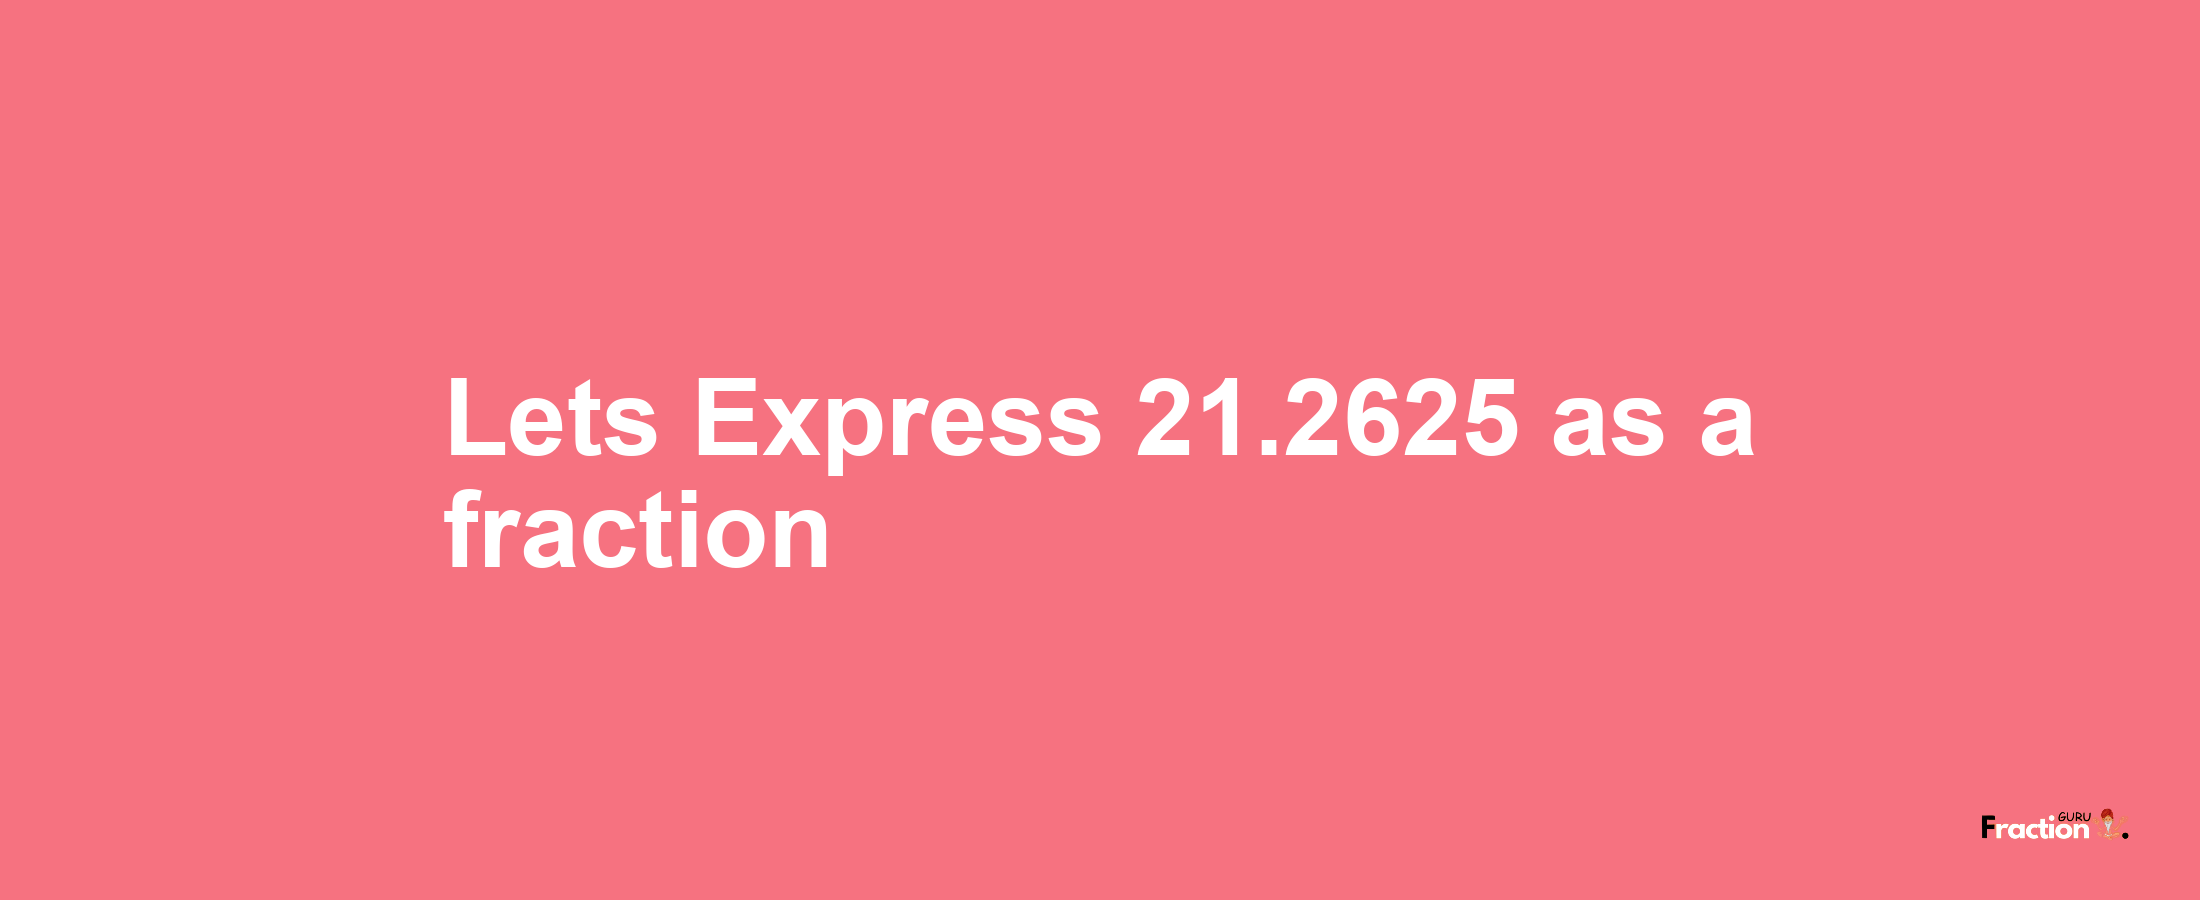 Lets Express 21.2625 as afraction